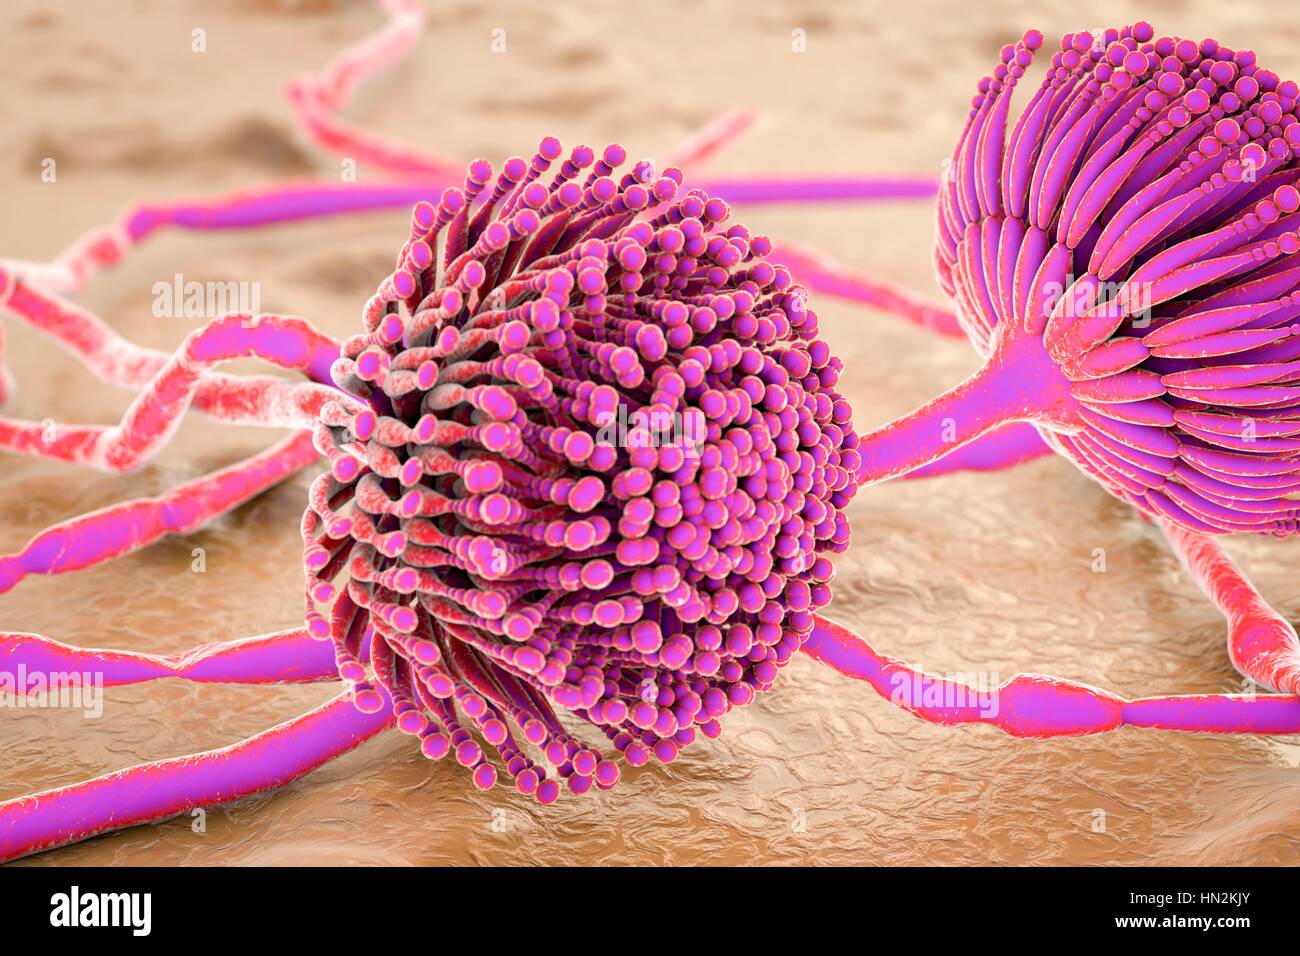 Aspergillus fungus, computer illustration. This is a toxic fungus that causes diseases in humans. These include fungal ear, lung and skin infections (lobomycosis and pulmonary aspergillosis, and mycotic keratitis). It also produces aflatoxin, one of the most powerful naturally occurring carcinogens. This can cause cancers and disorders of the lung, liver, spleen, stomach, colon and kidney. Stock Photo